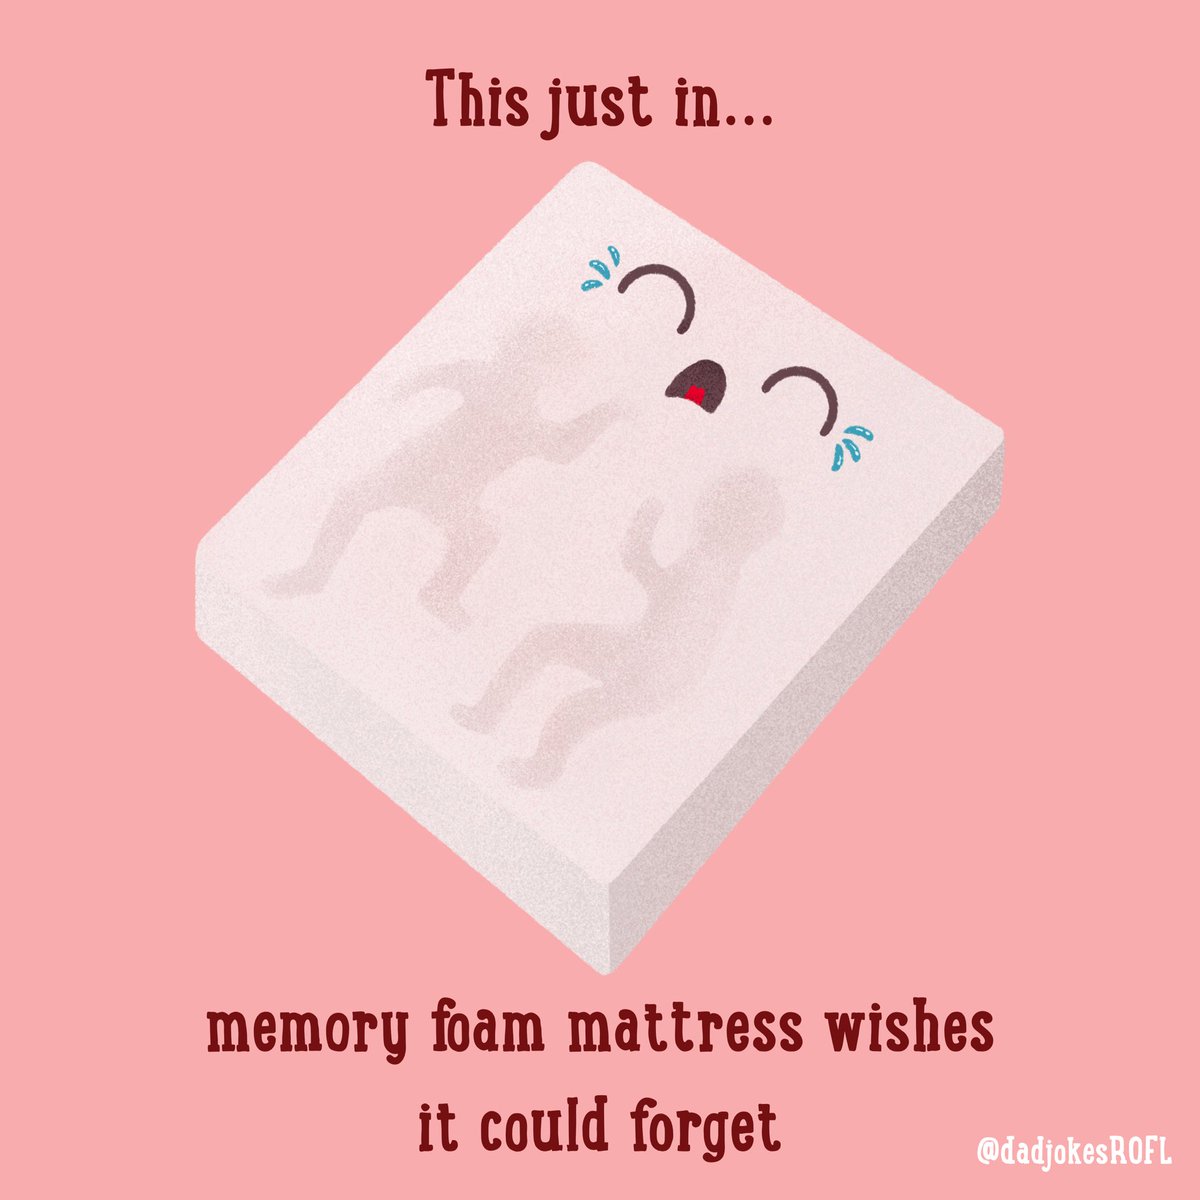 This just in... 
memory foam mattress wishes it could forget

 ~

#fakenews #dadjoke #dadjokes #illustration #procreate #punny #humor #puns #rofl #dadhumor #mattress #memoryfoam #memoryfoammattress #memoryfoampillows #bedrooms #forget #wishicouldforget #cantunseeit